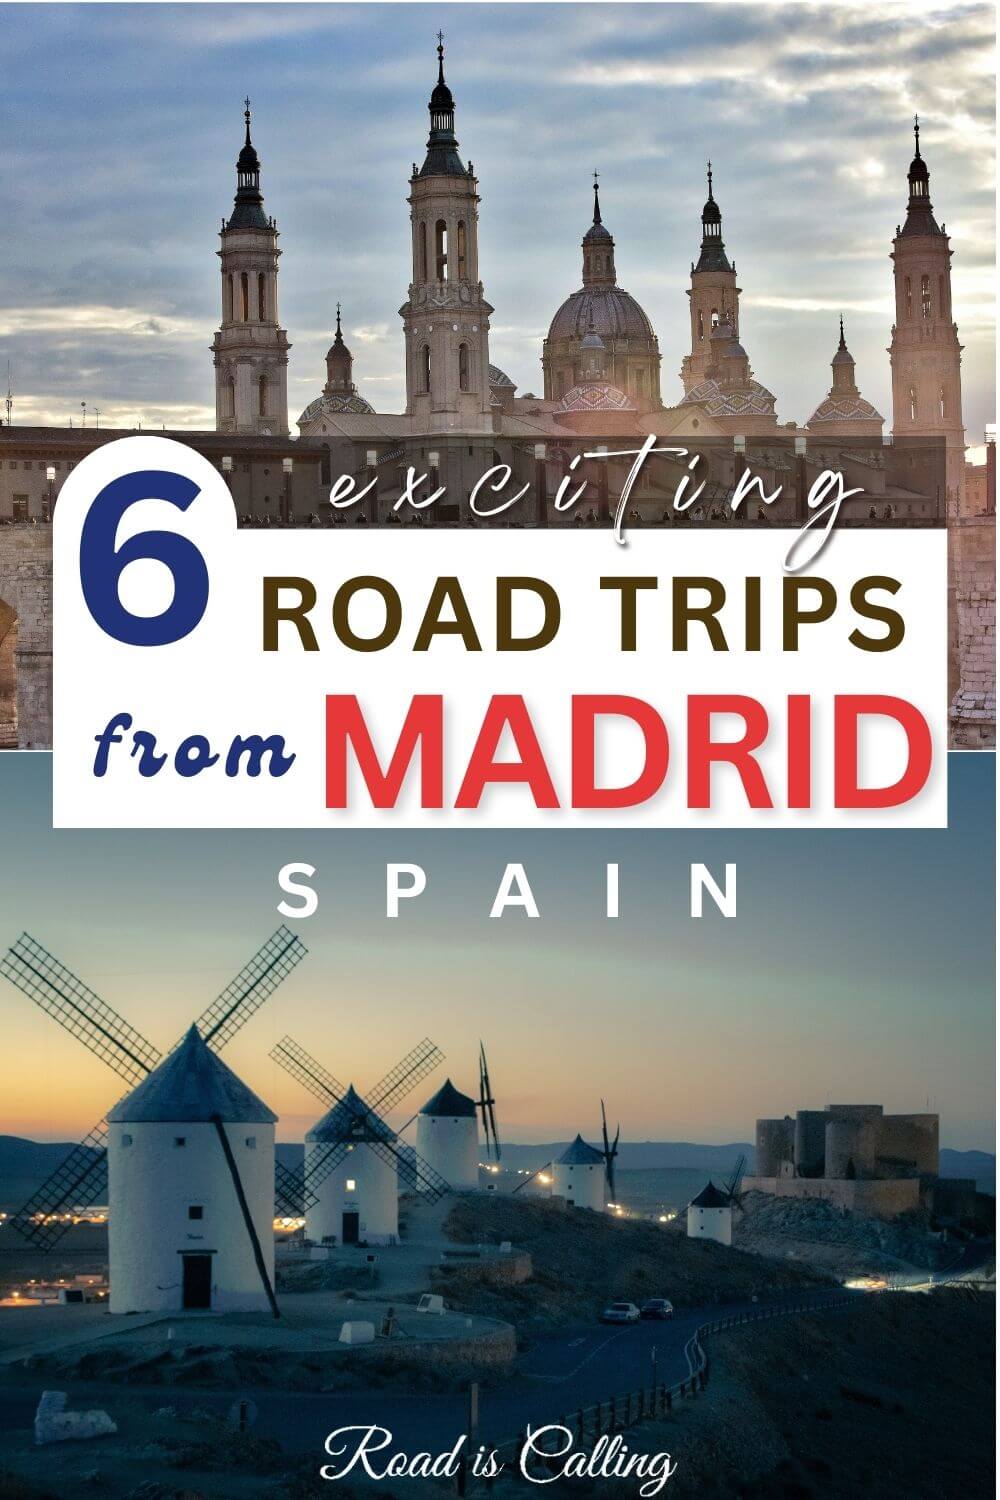 Incredible road trips from Madrid